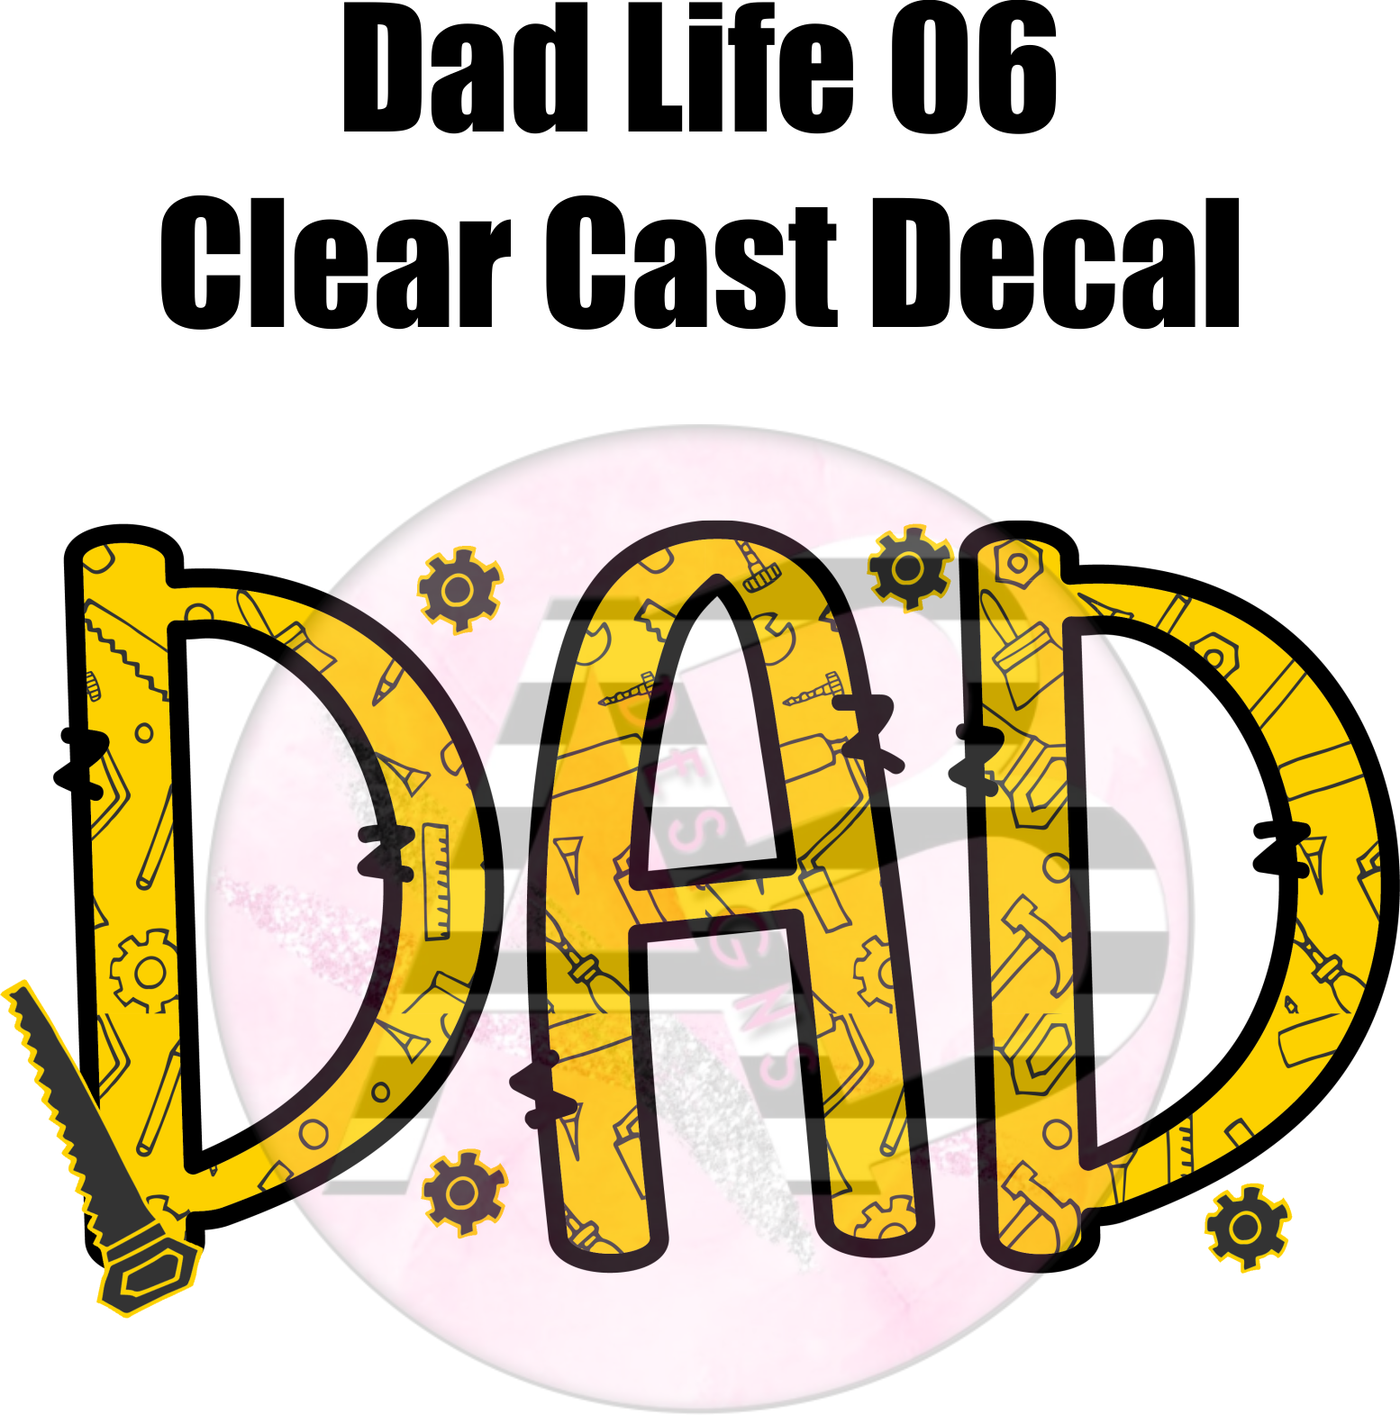 Dad Life 06 - Clear Cast Decal